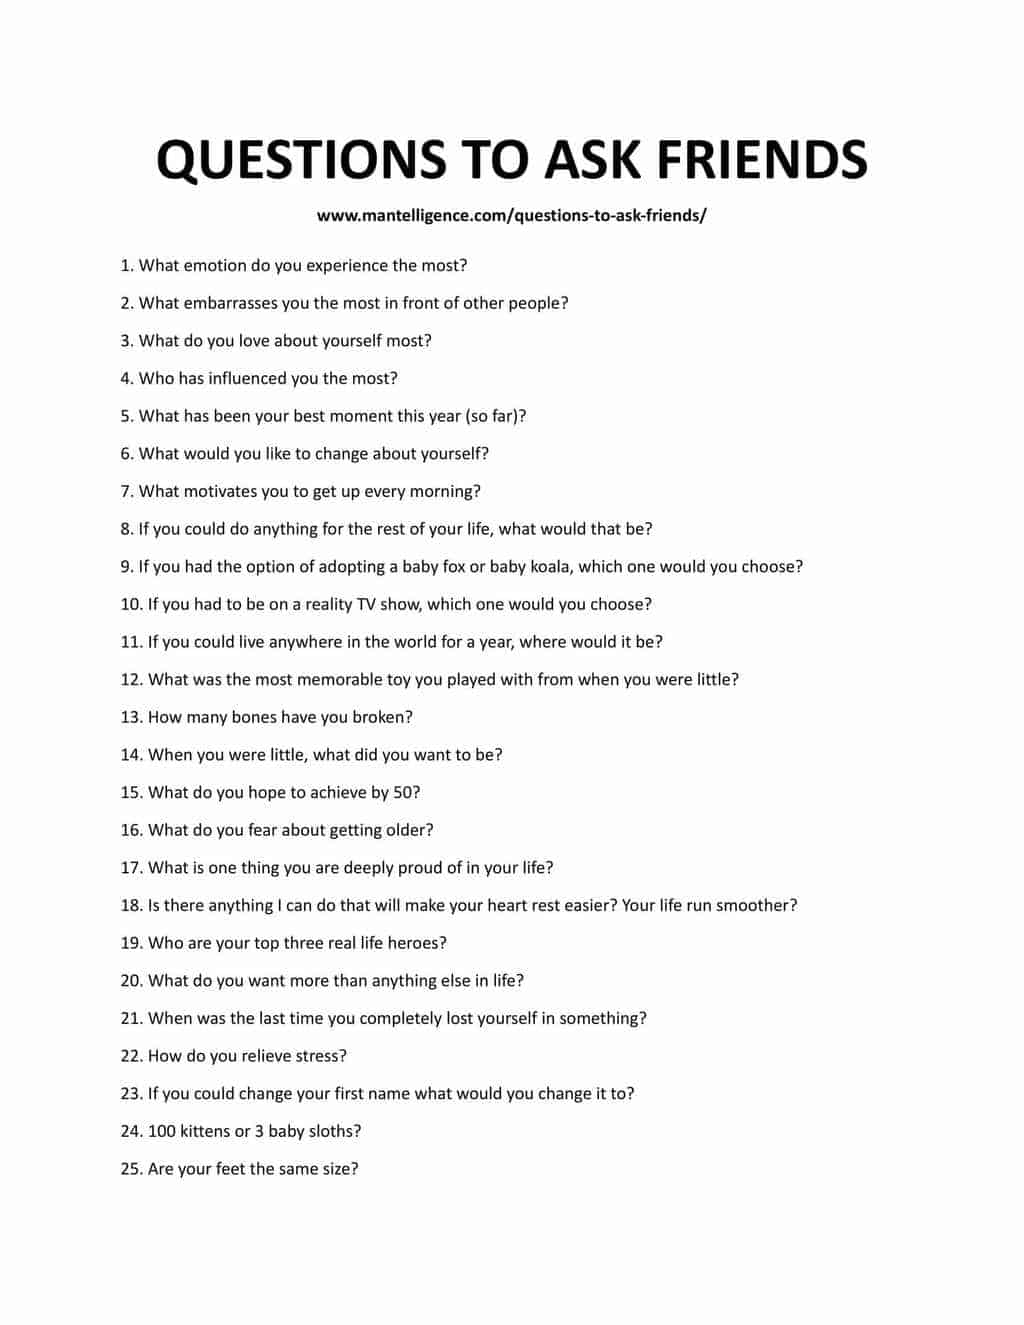 Questions For Friends